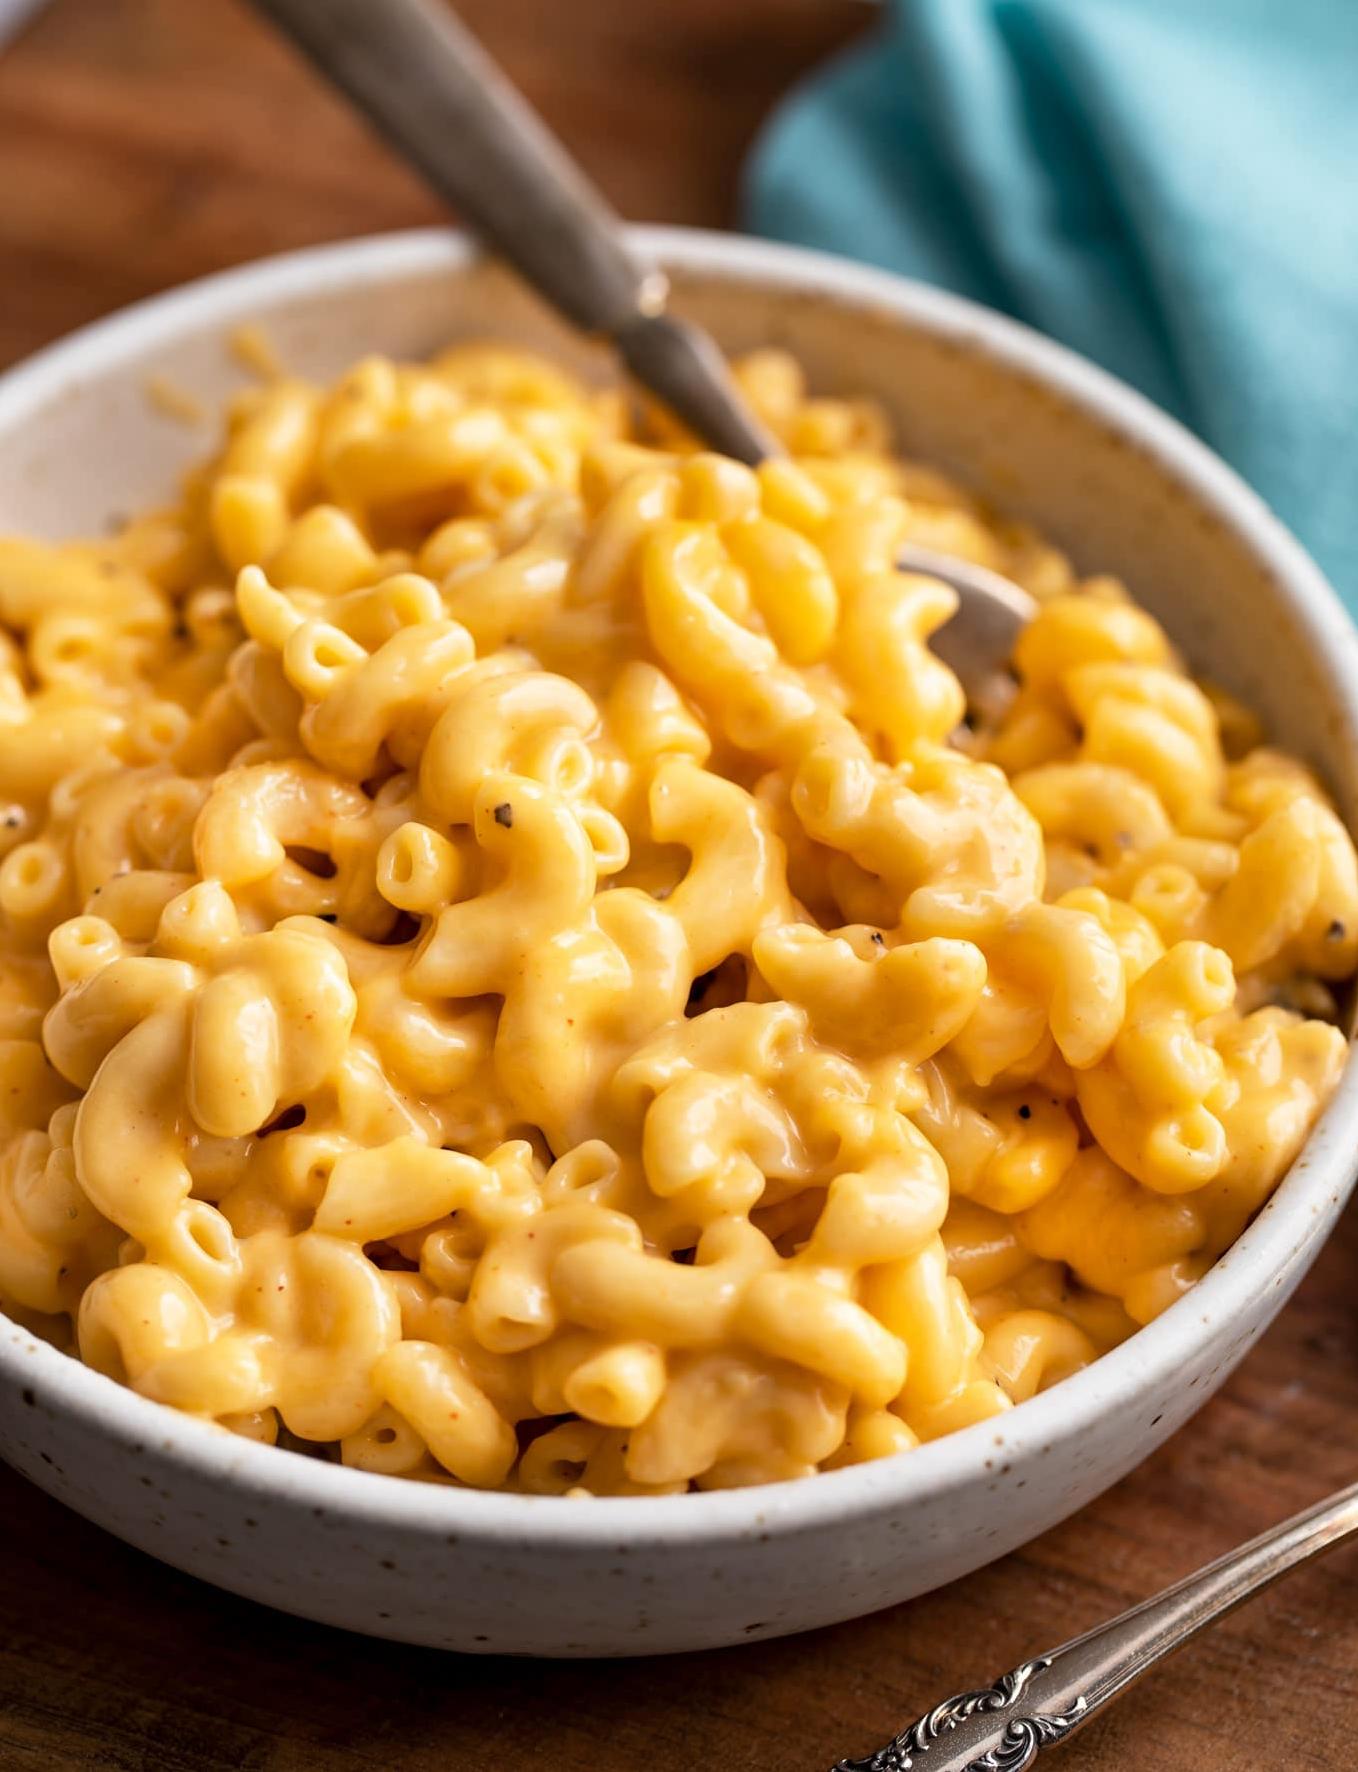  No more store-bought mac and cheese, this homemade version is quick and easy to make.